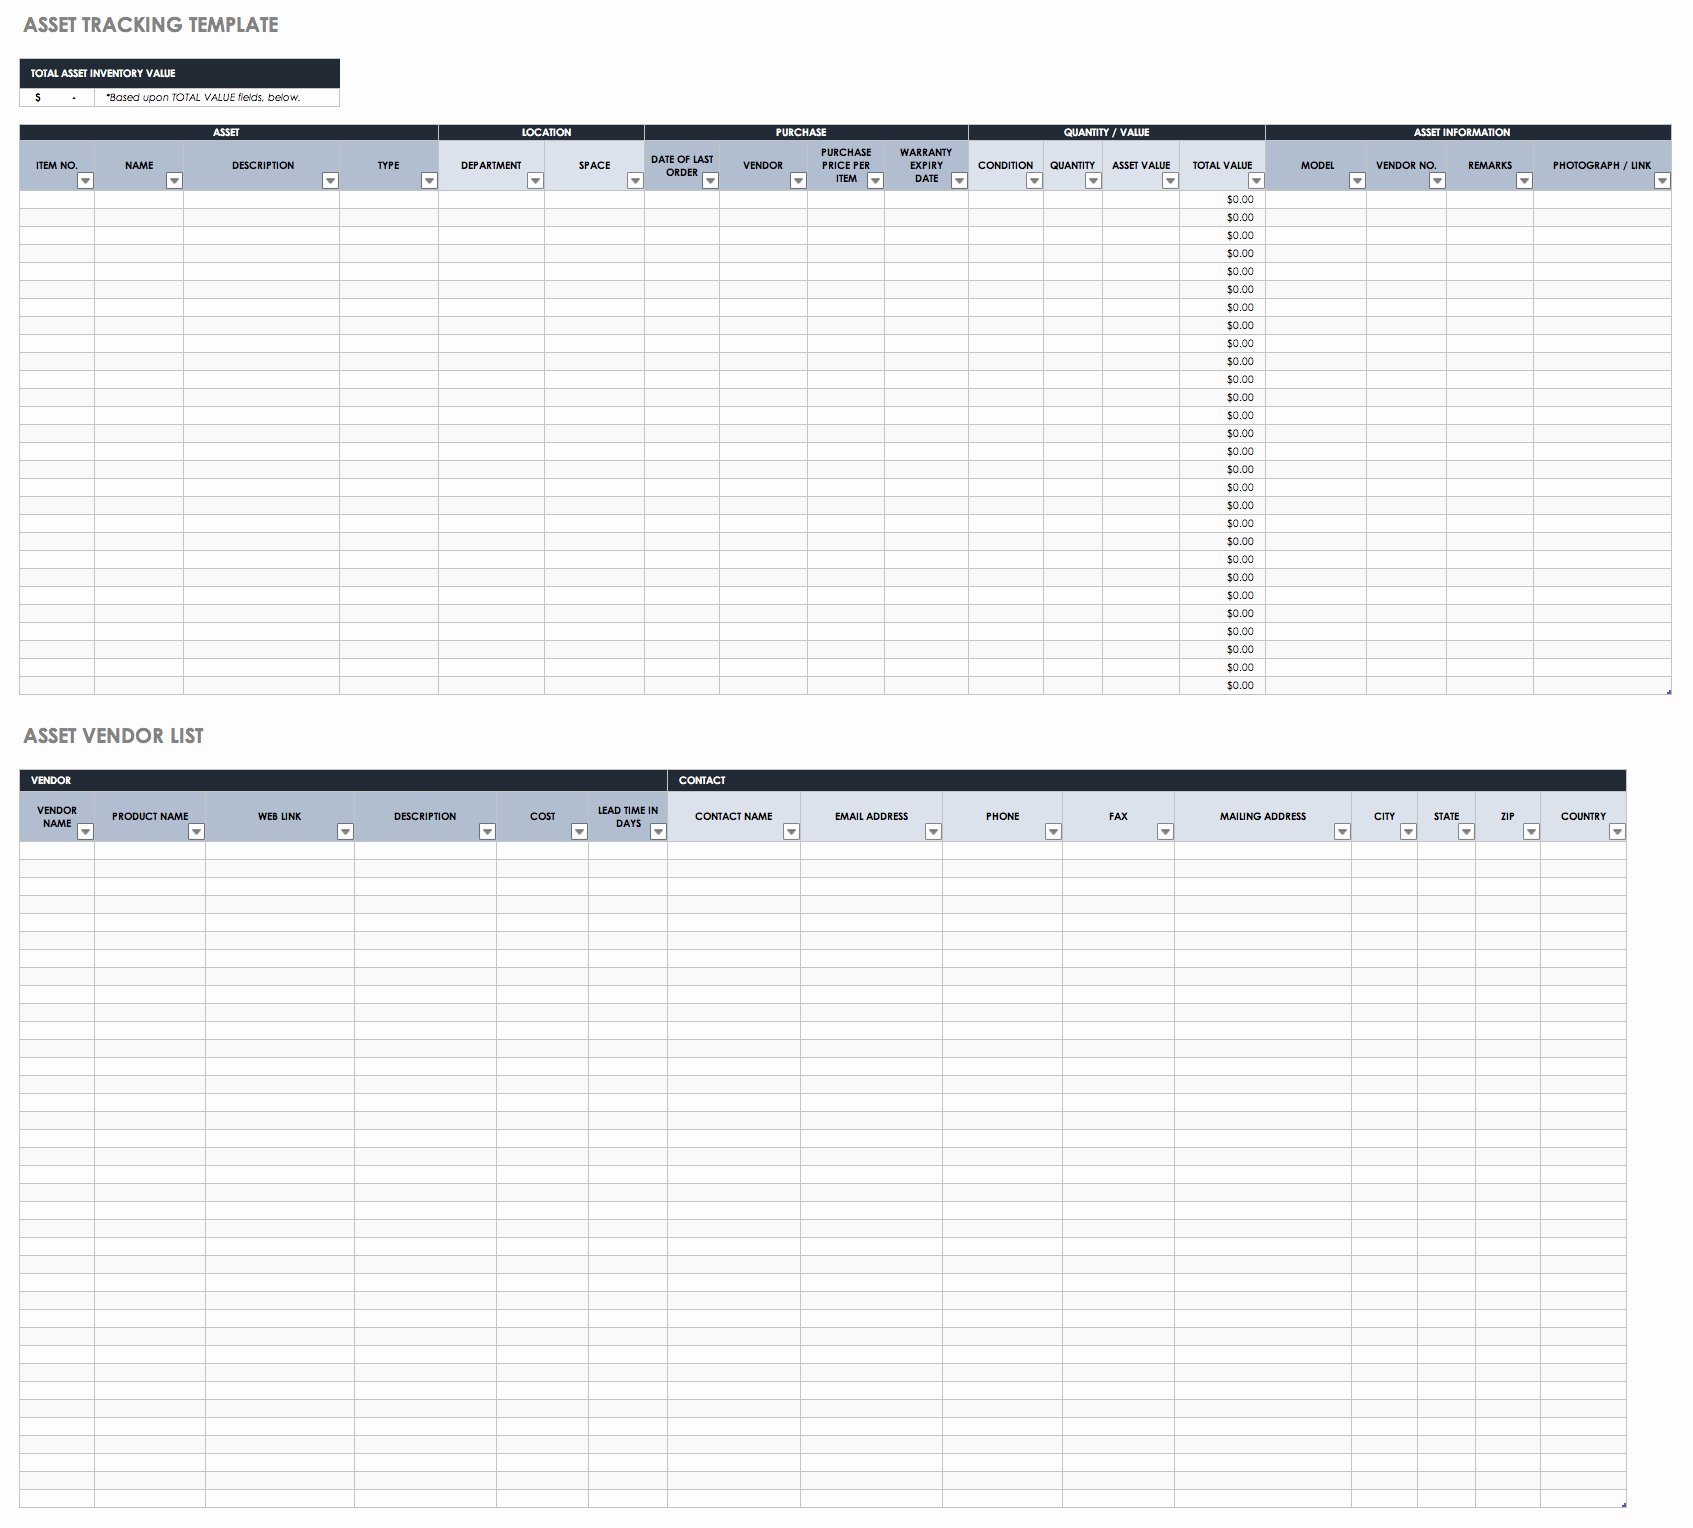 Excel Inventory Template with Pictures Best Of Uniform Inventory Spreadsheet Google Spreadshee Uniform